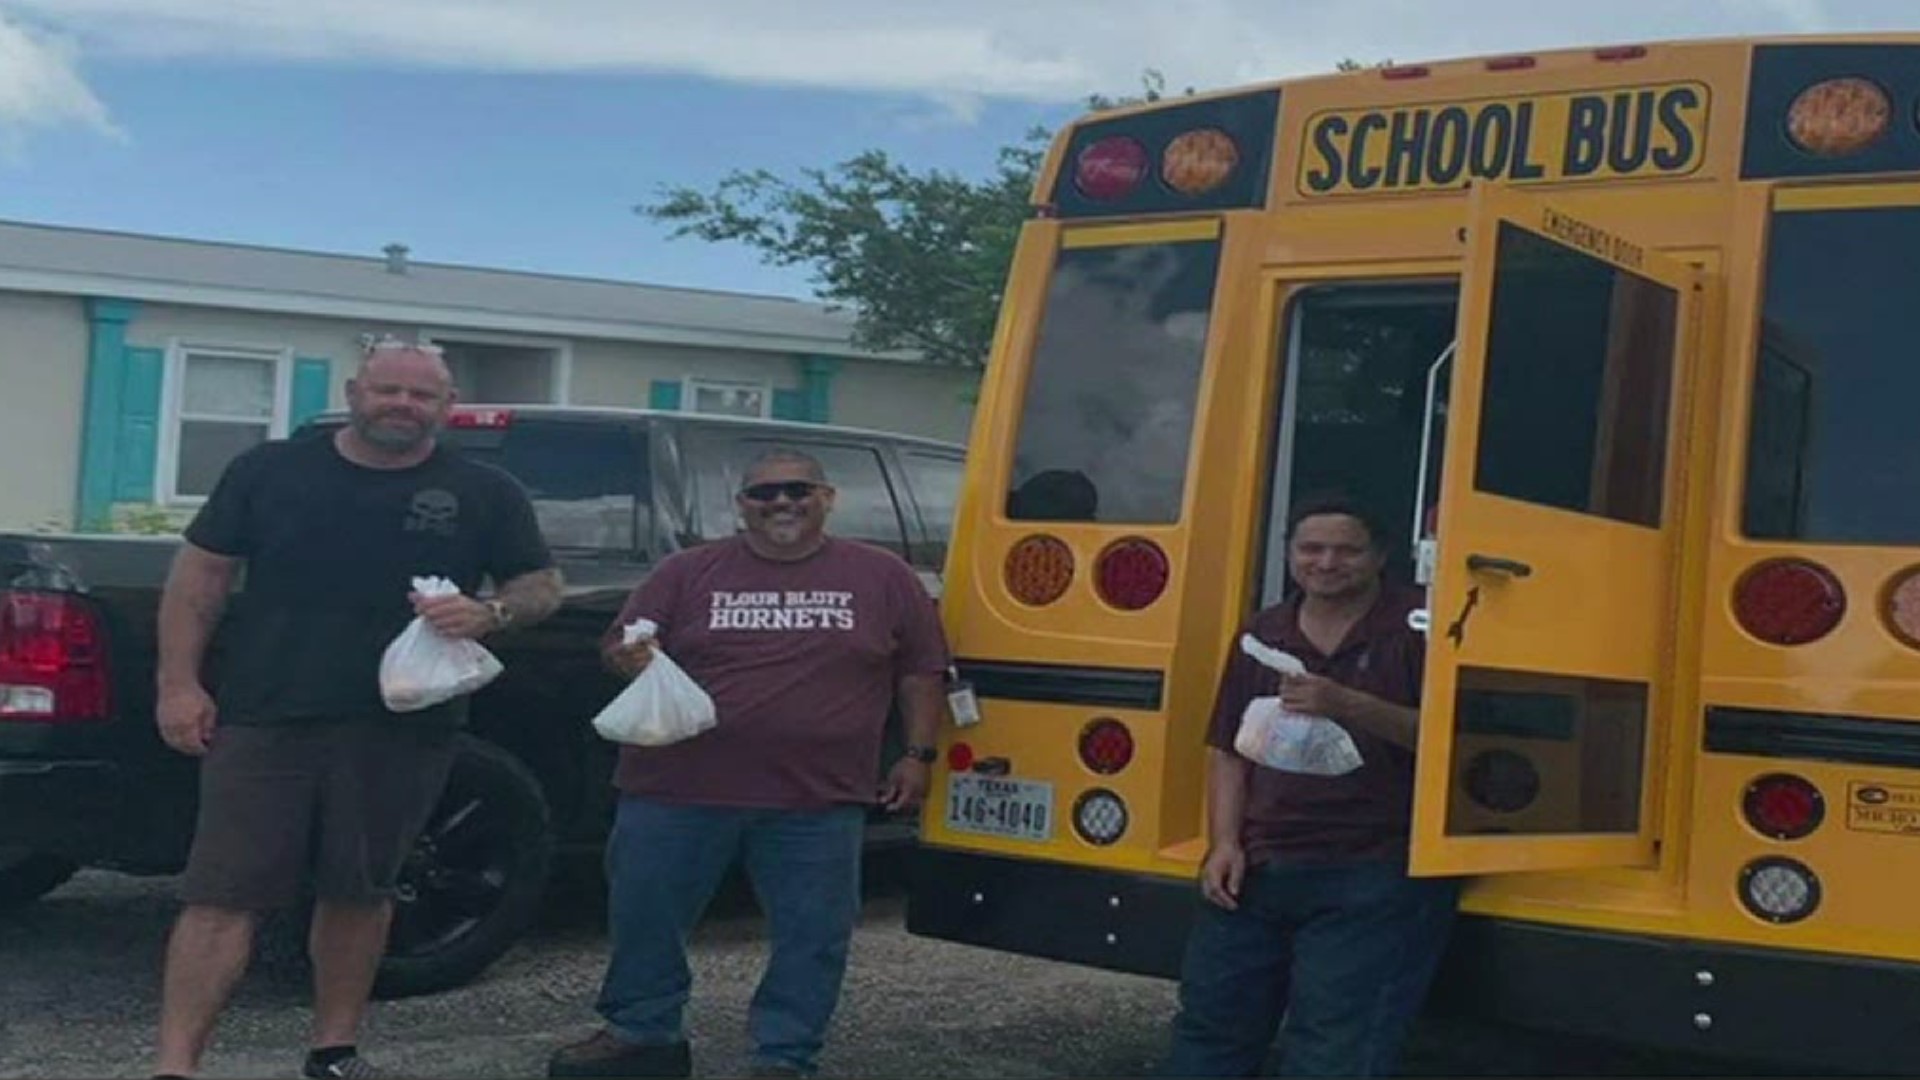 The school district is doing their part to make sure students have something to eat this summer.